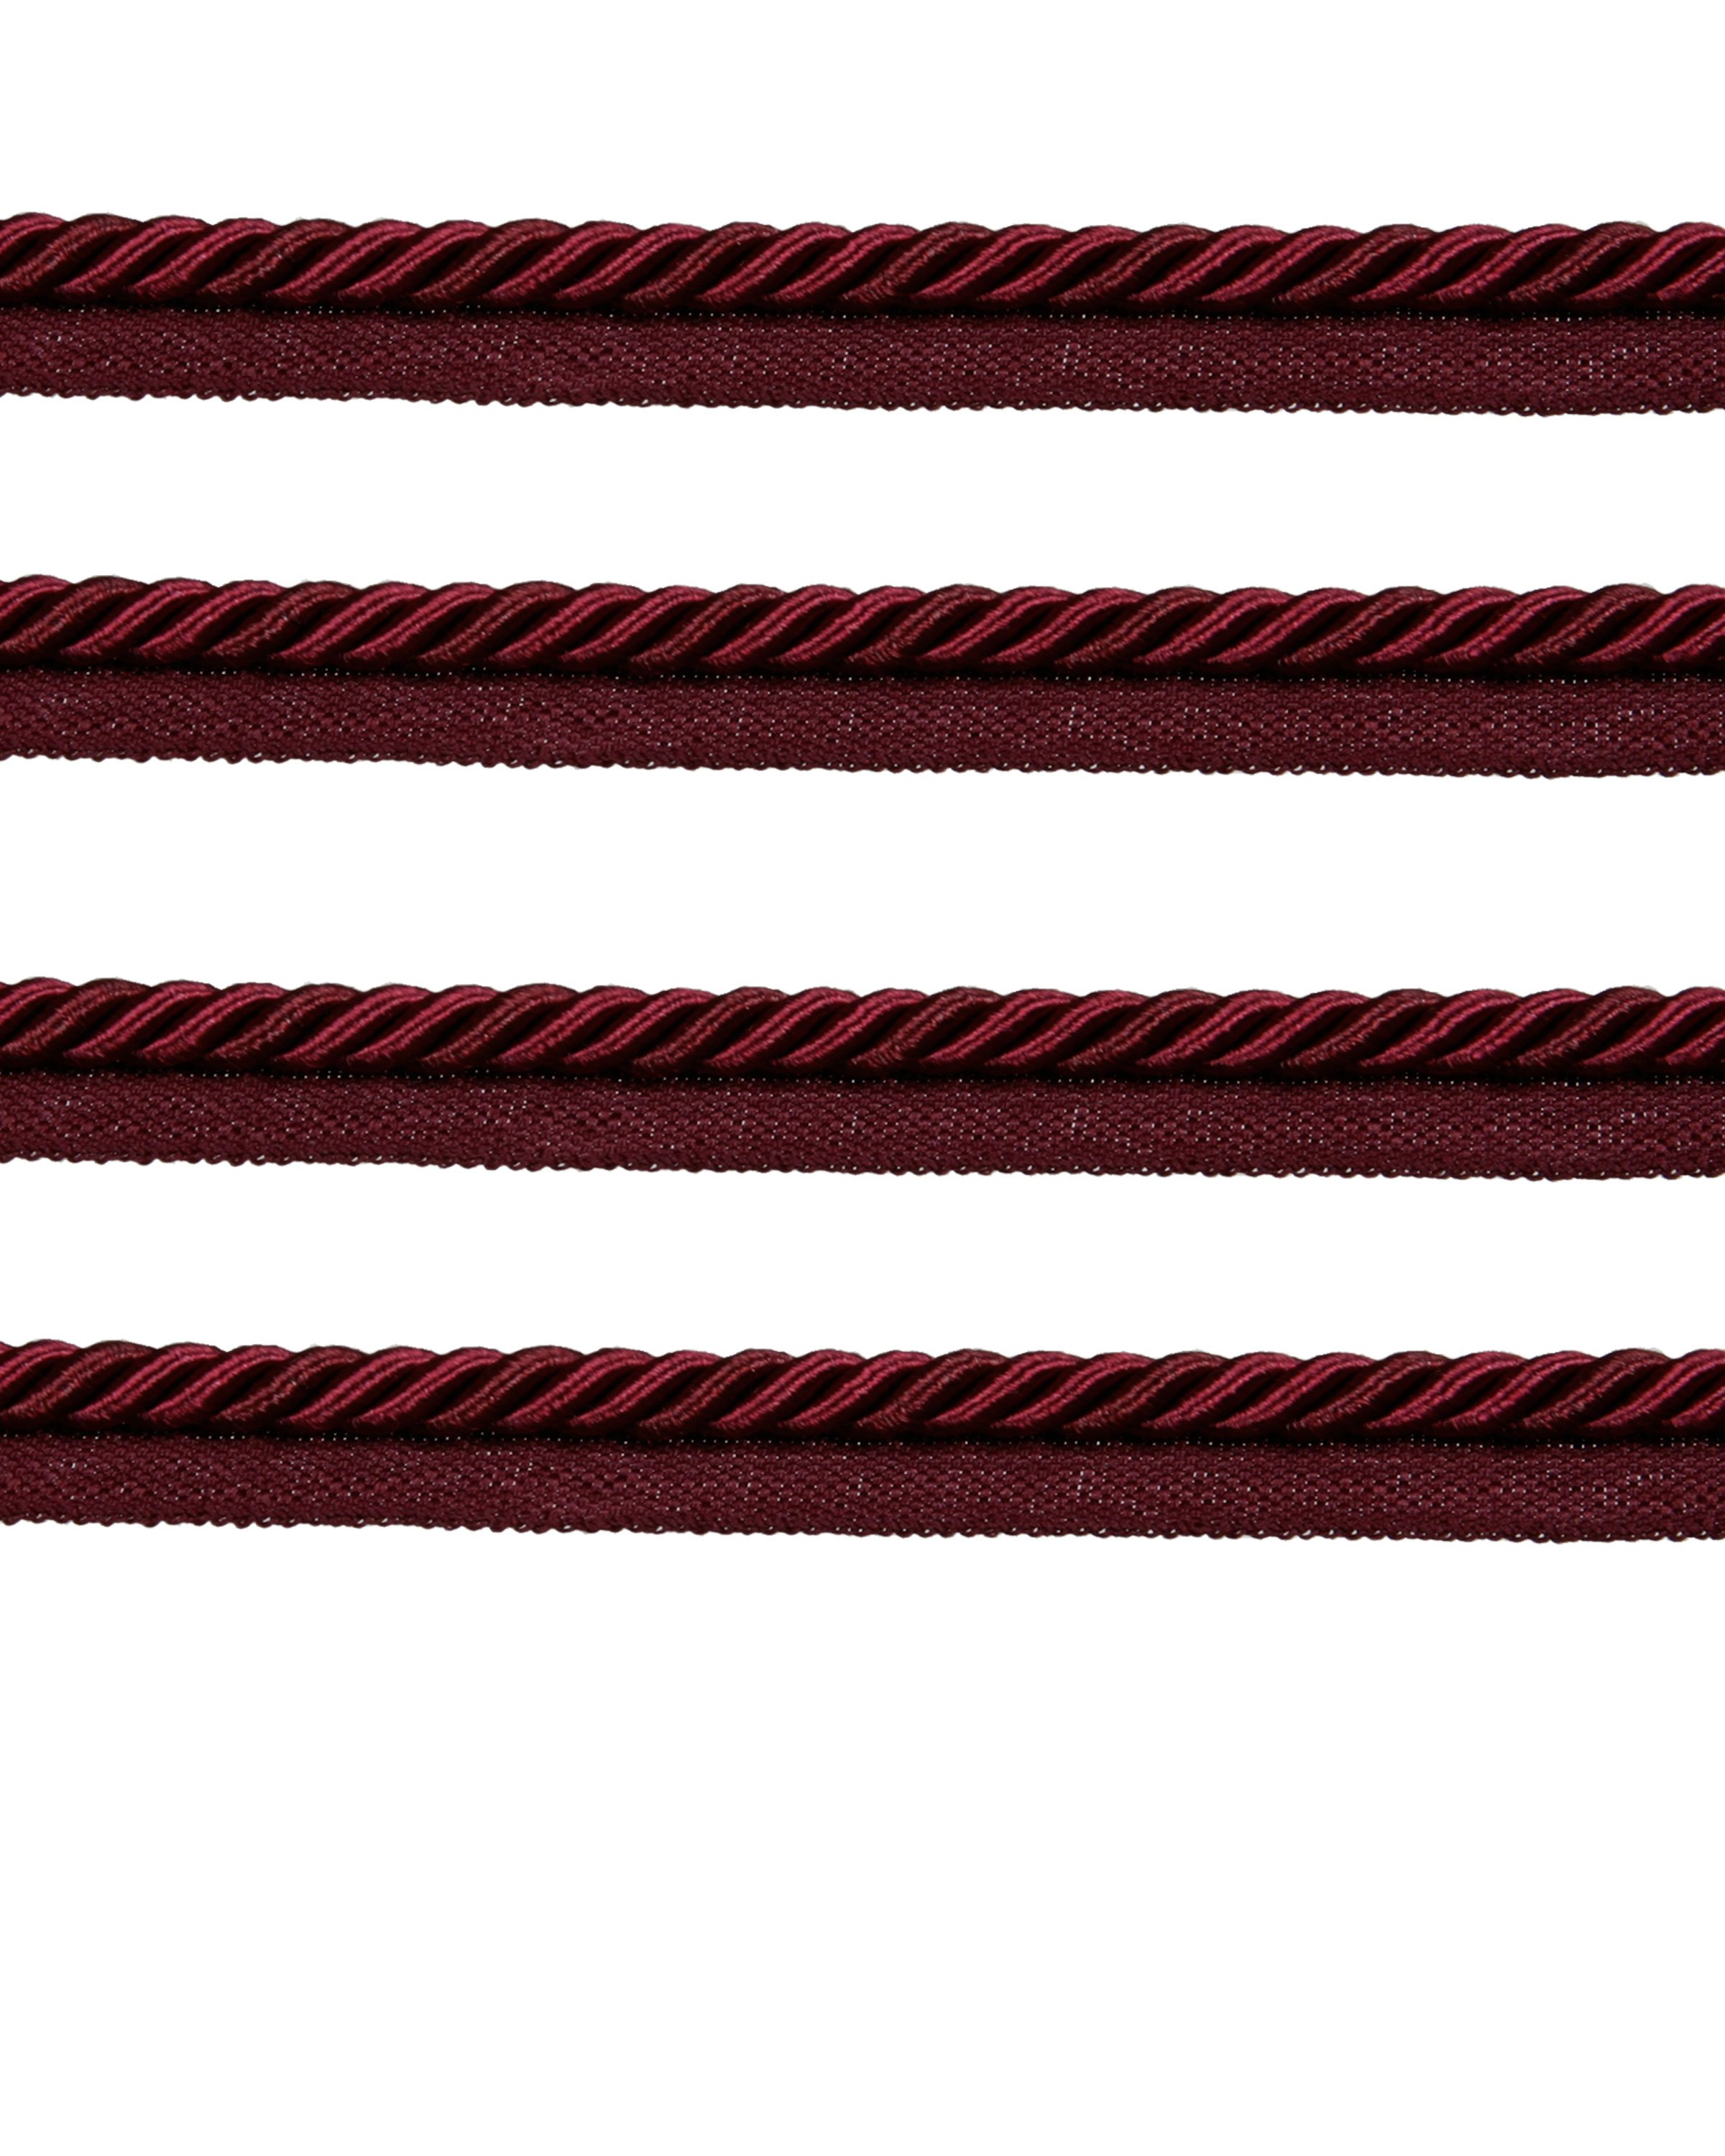 Piping Cord 8mm 2 Tone Twist on Tape - Red Wine Price is for 5 metres 